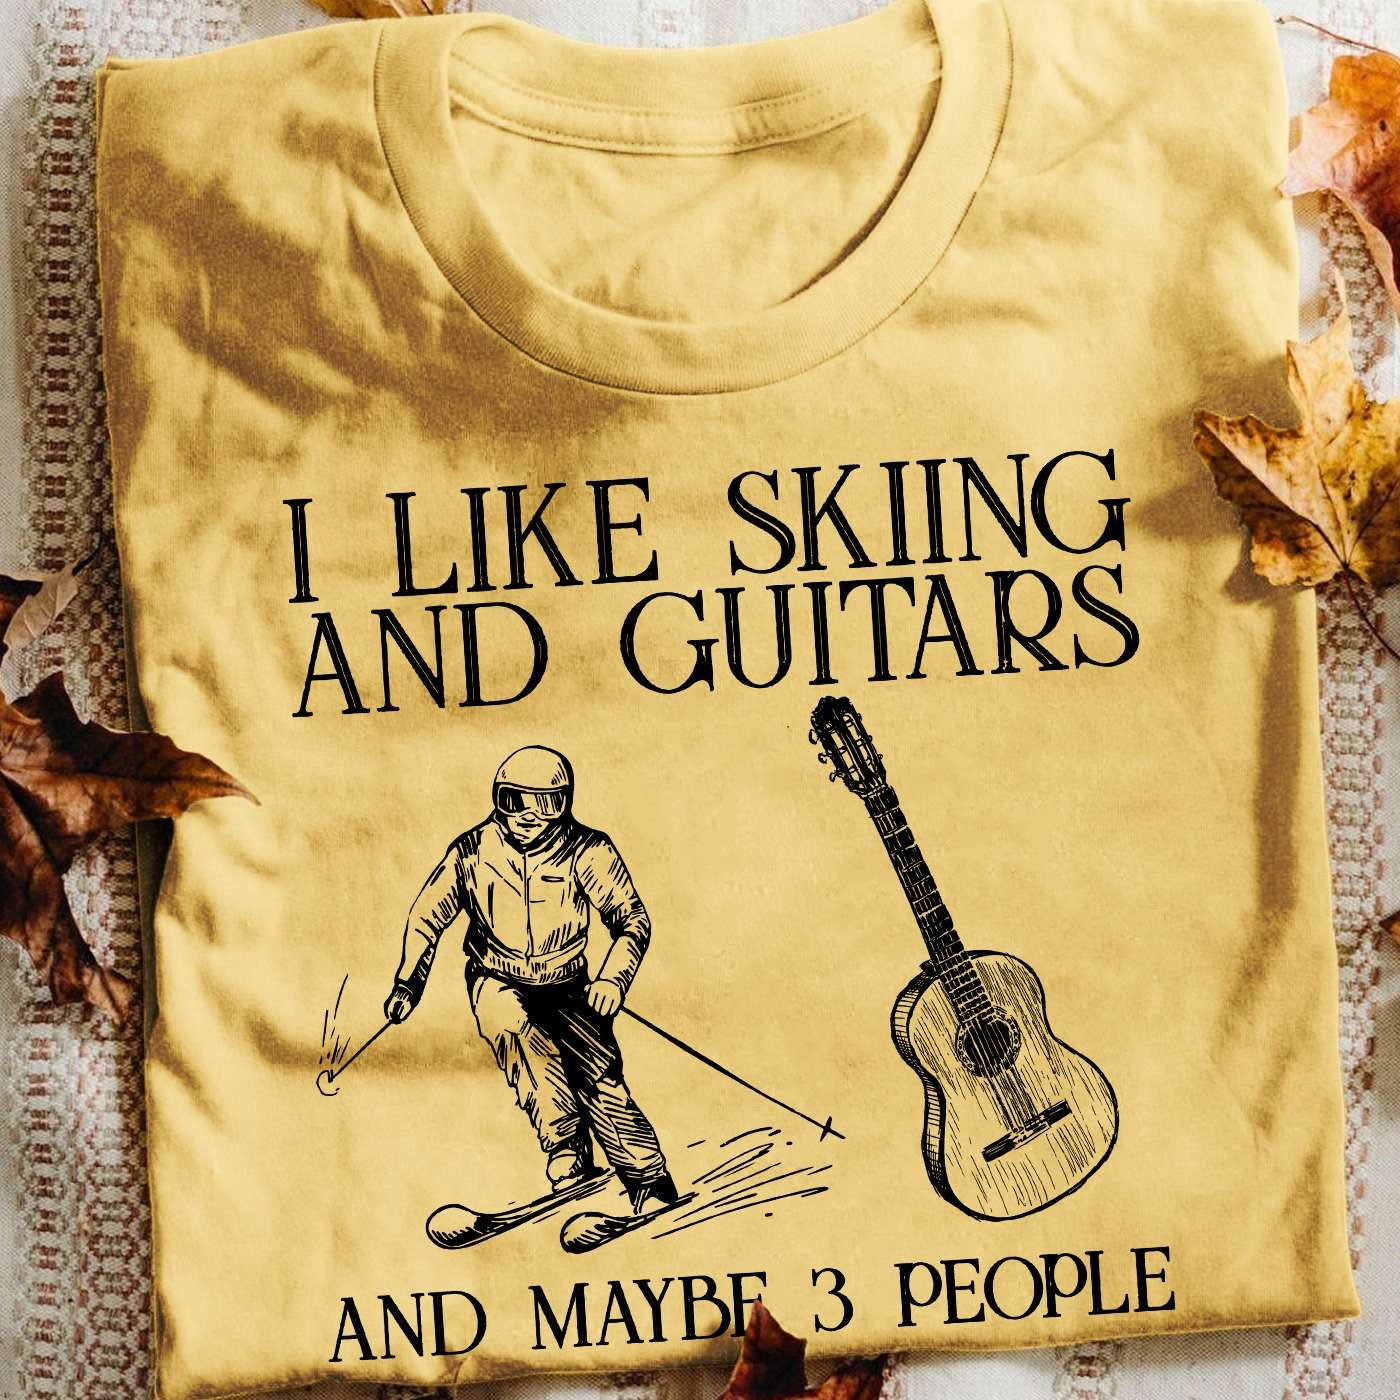 I like skiing and guitars and maybe 3 people - old man skiing